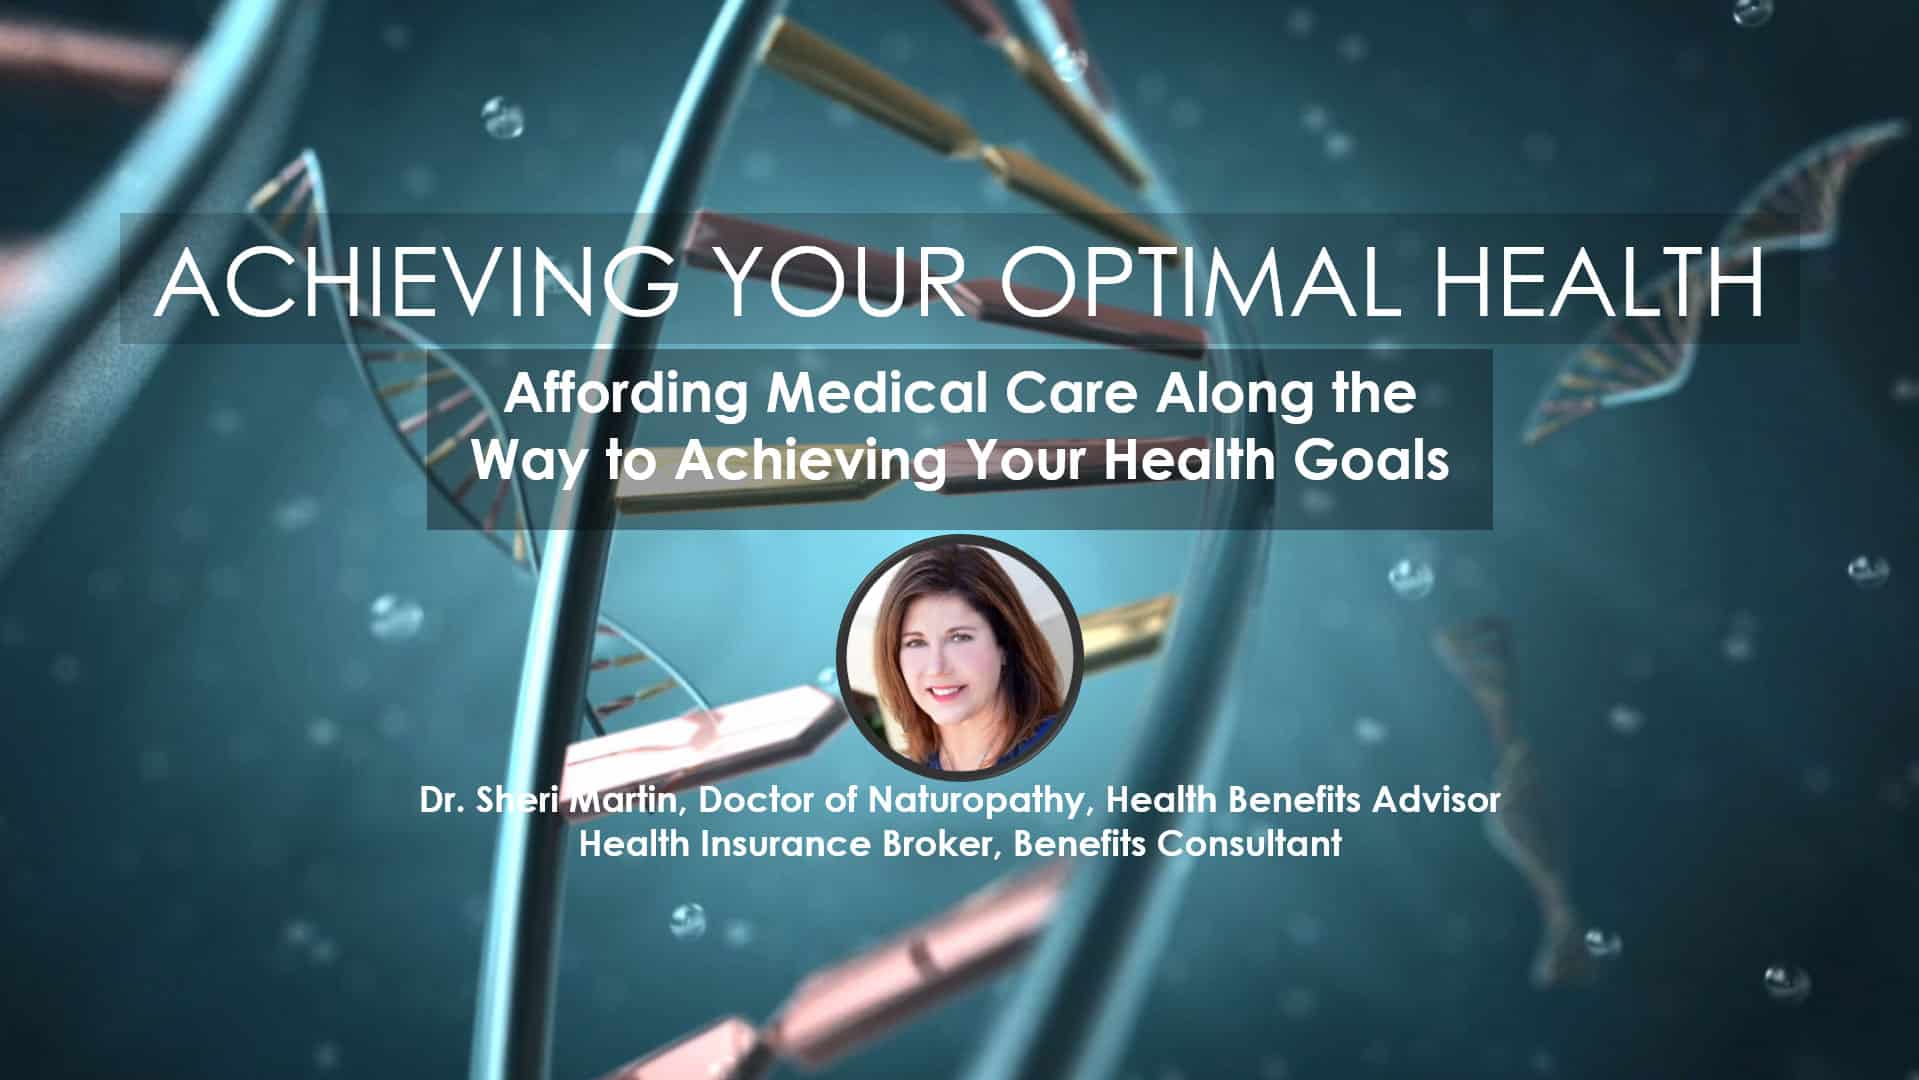 Affording Medical Care Along the Way to Achieving Your Health Goals | Sheri Martin, Doctor of Naturopathy, Health Benefits Advisor